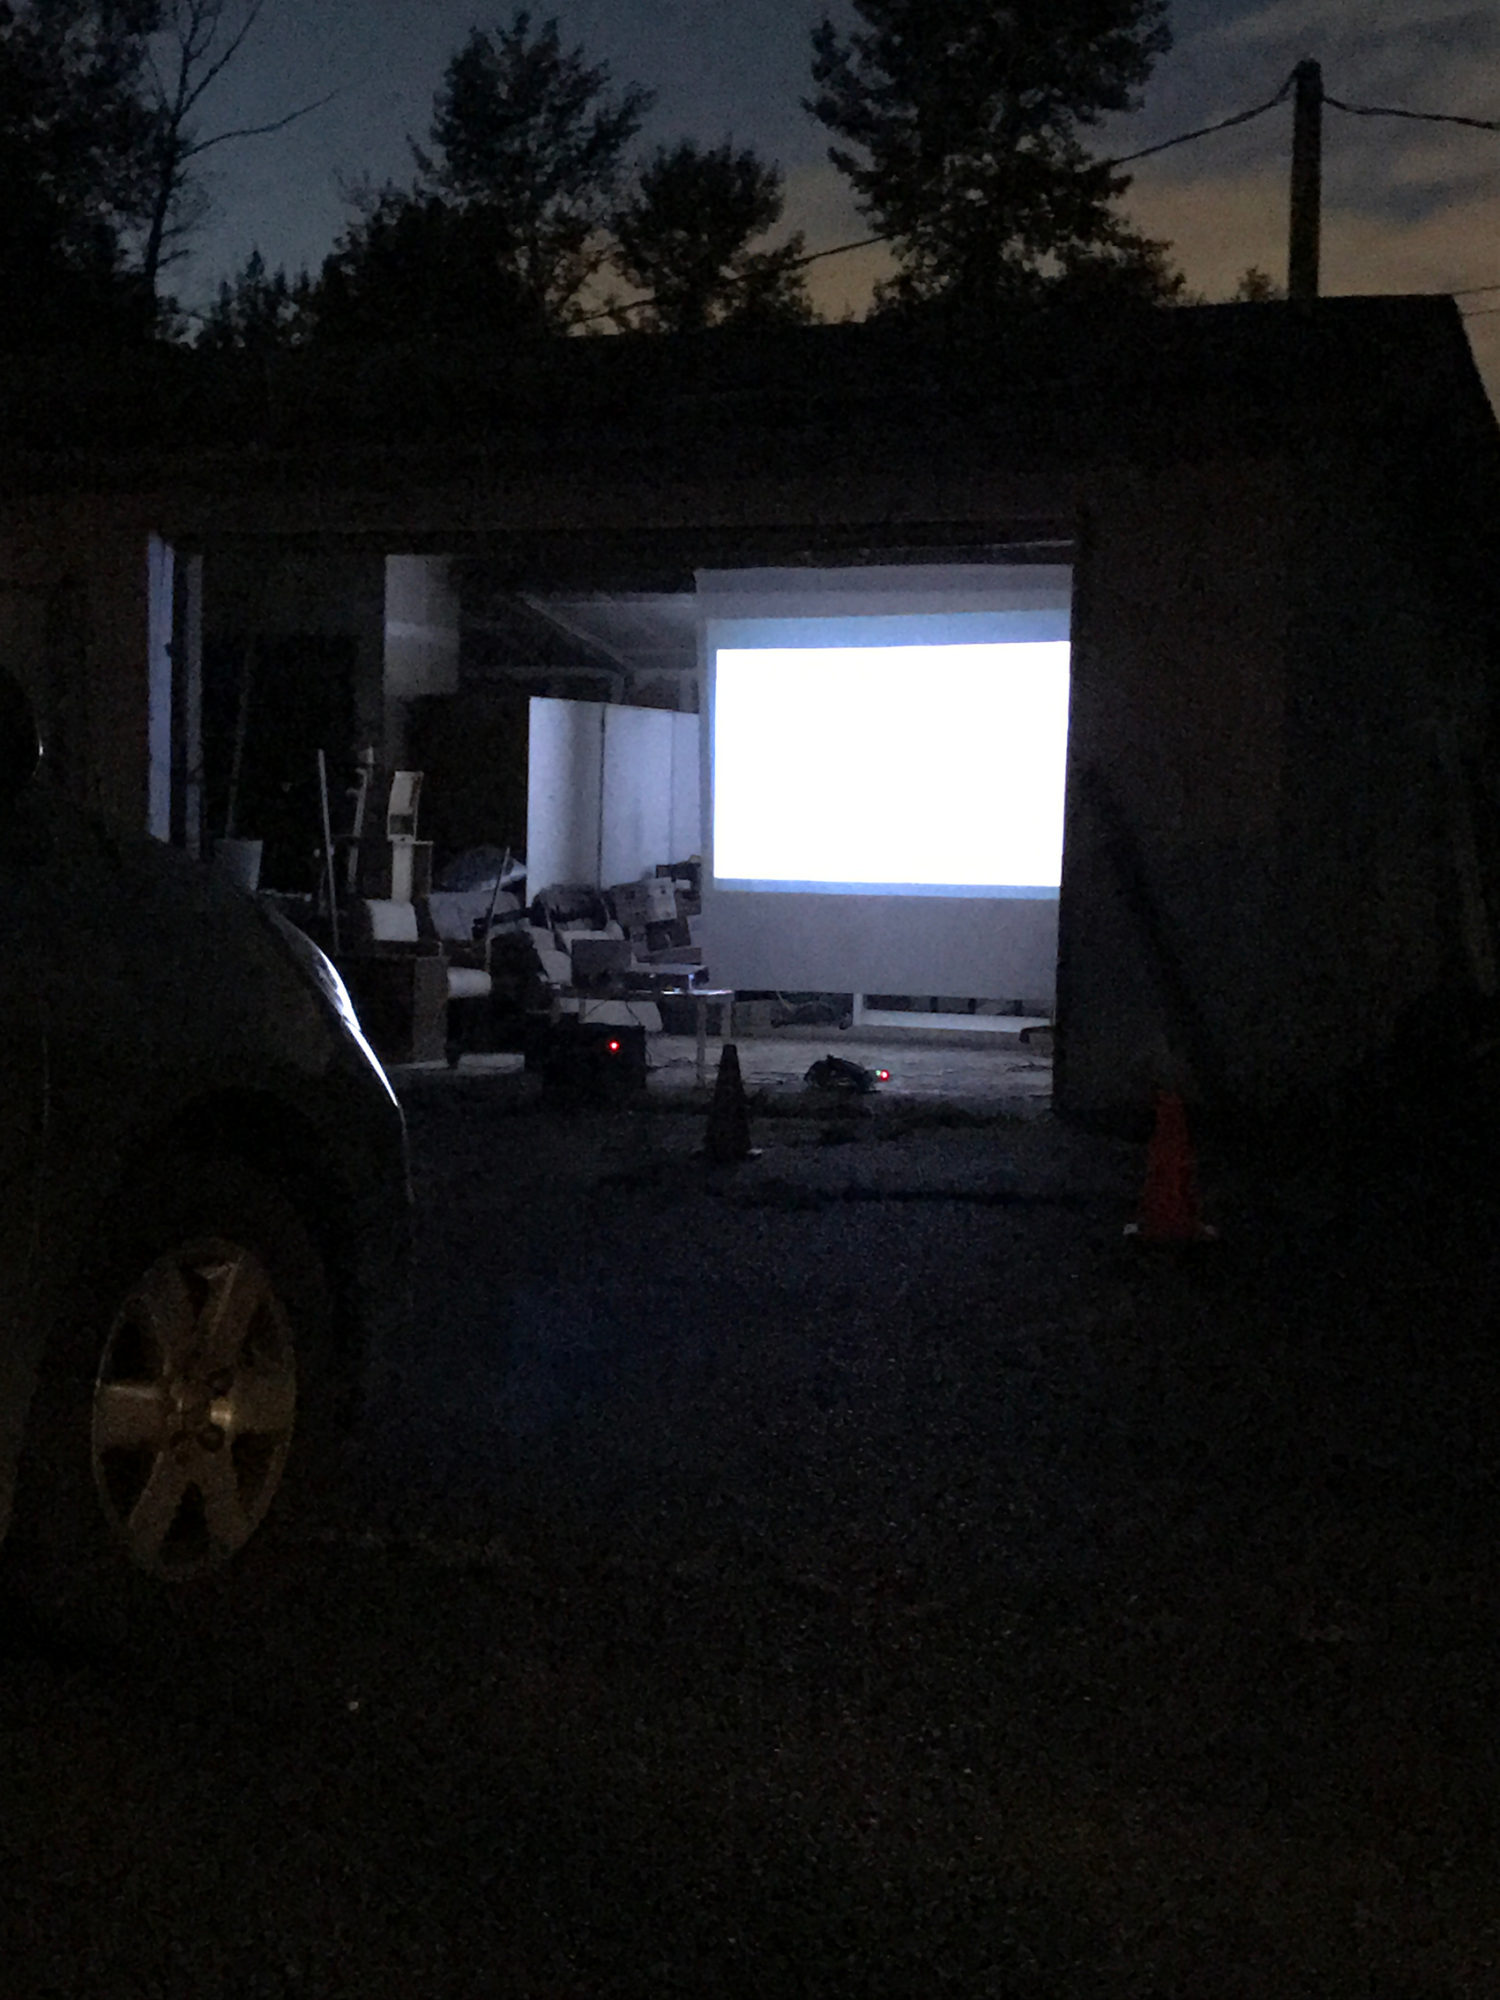 Nighttime viewing at the drive-in.